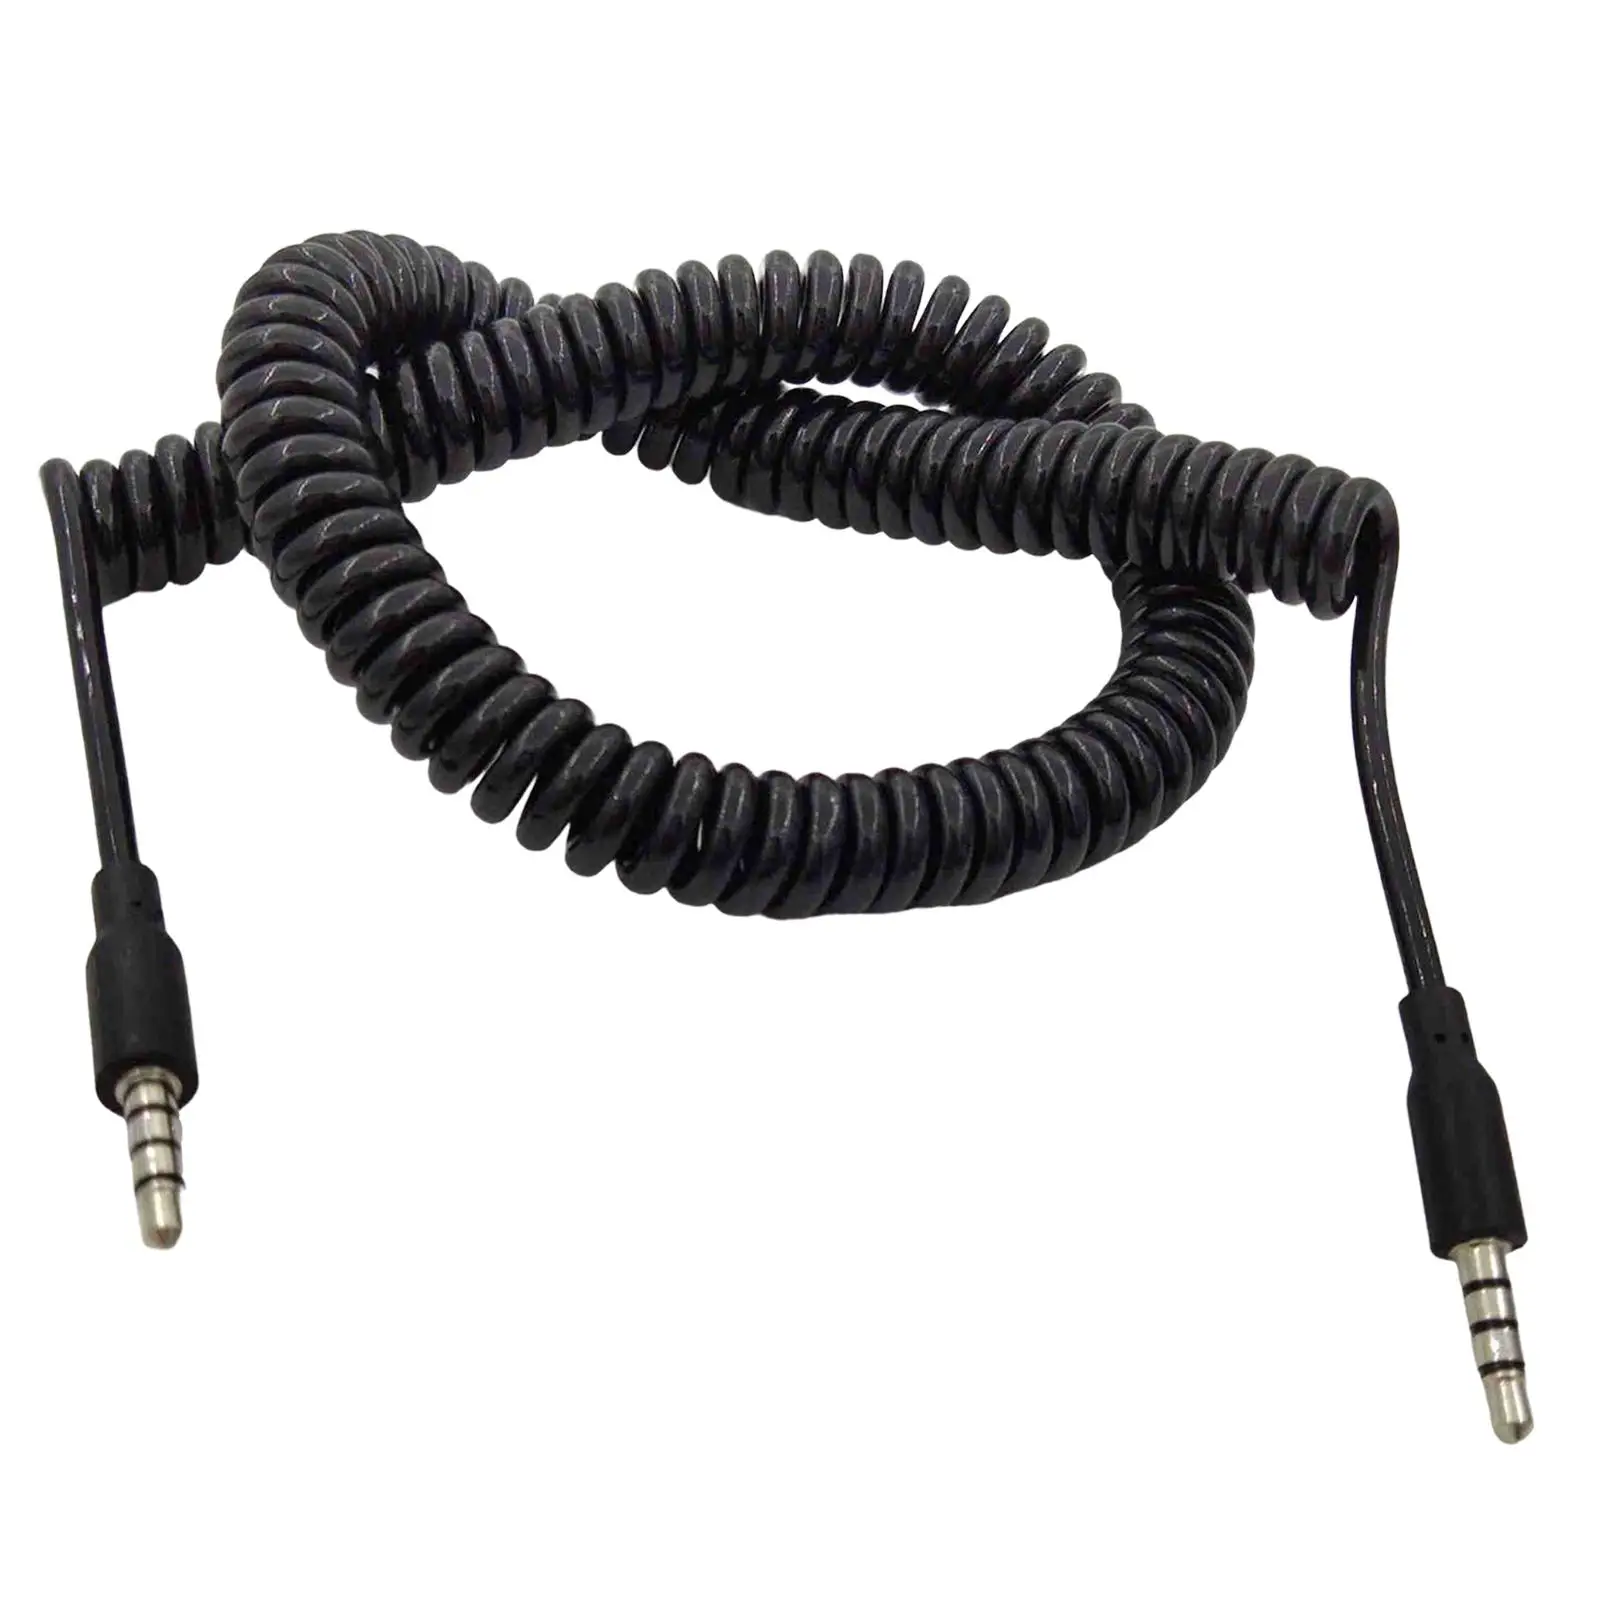 Audio Spiral Cable Nickel Plated for tablet Radios Computers